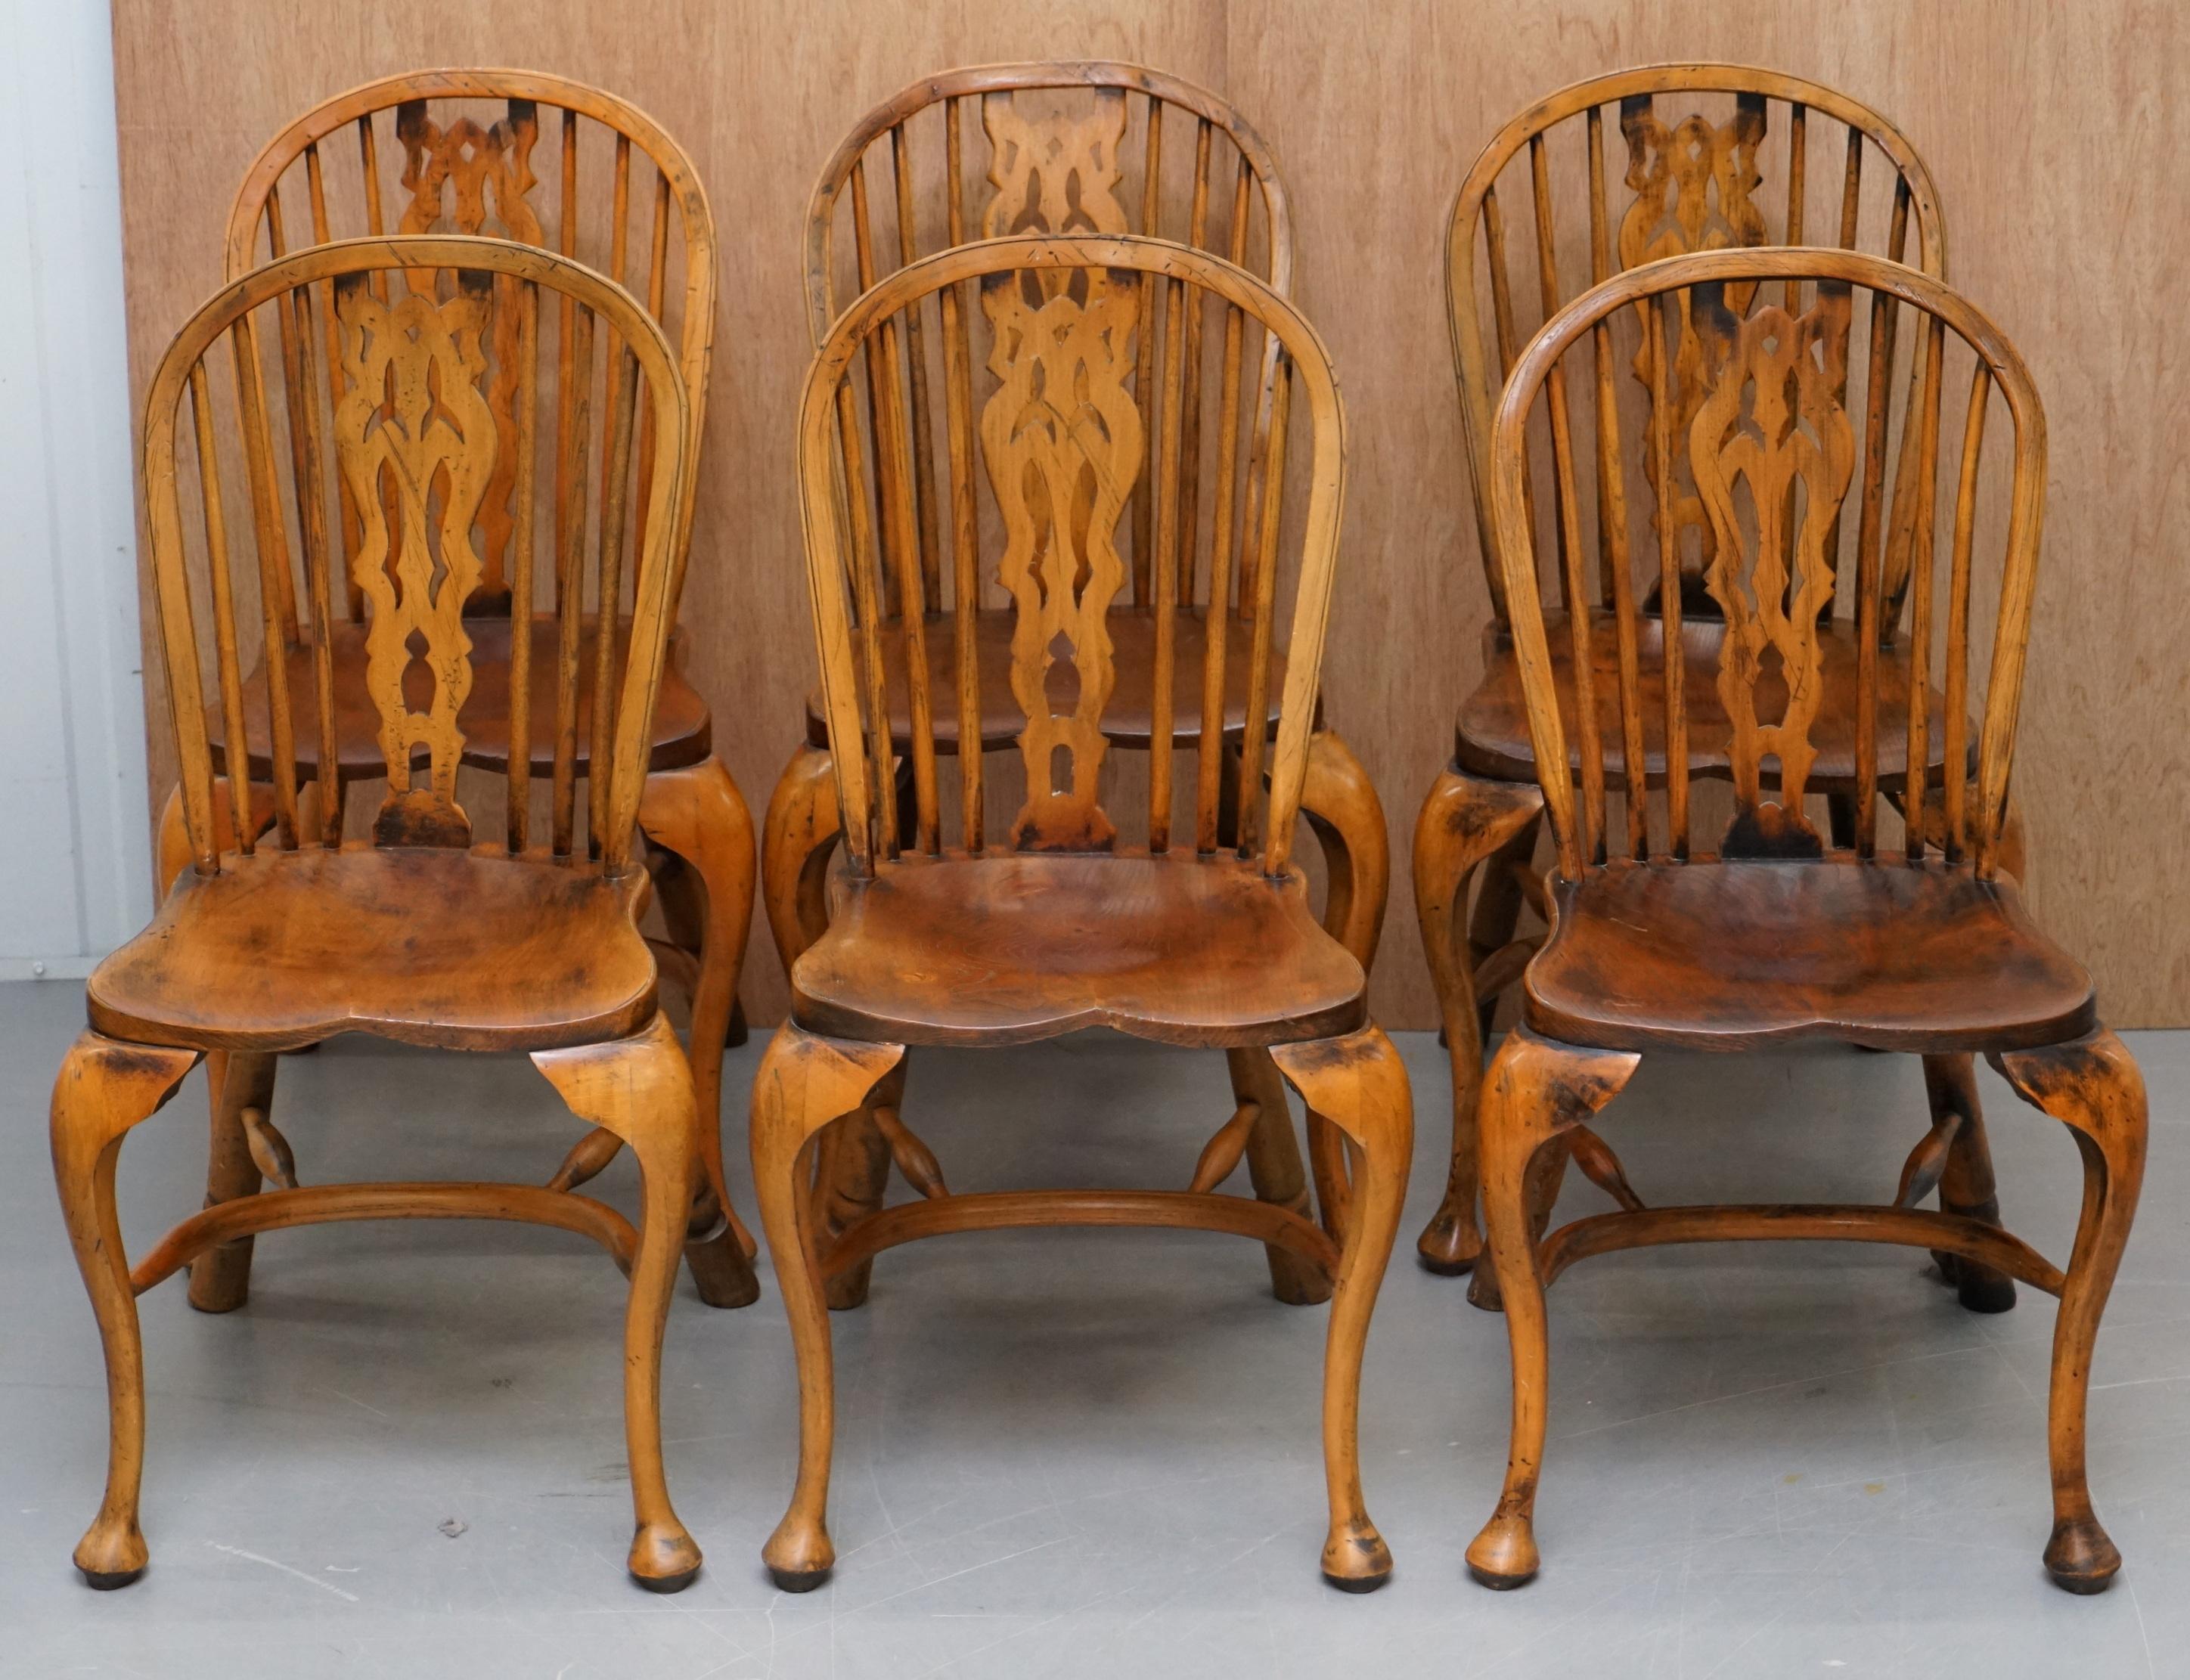 We are delighted to this stunning suite of vintage 18th-19th century style elm and beech wood Windsor dining chairs

A very good looking decorative and nicely made suite, these have some age to them but they are in the style of the 18th and 19th